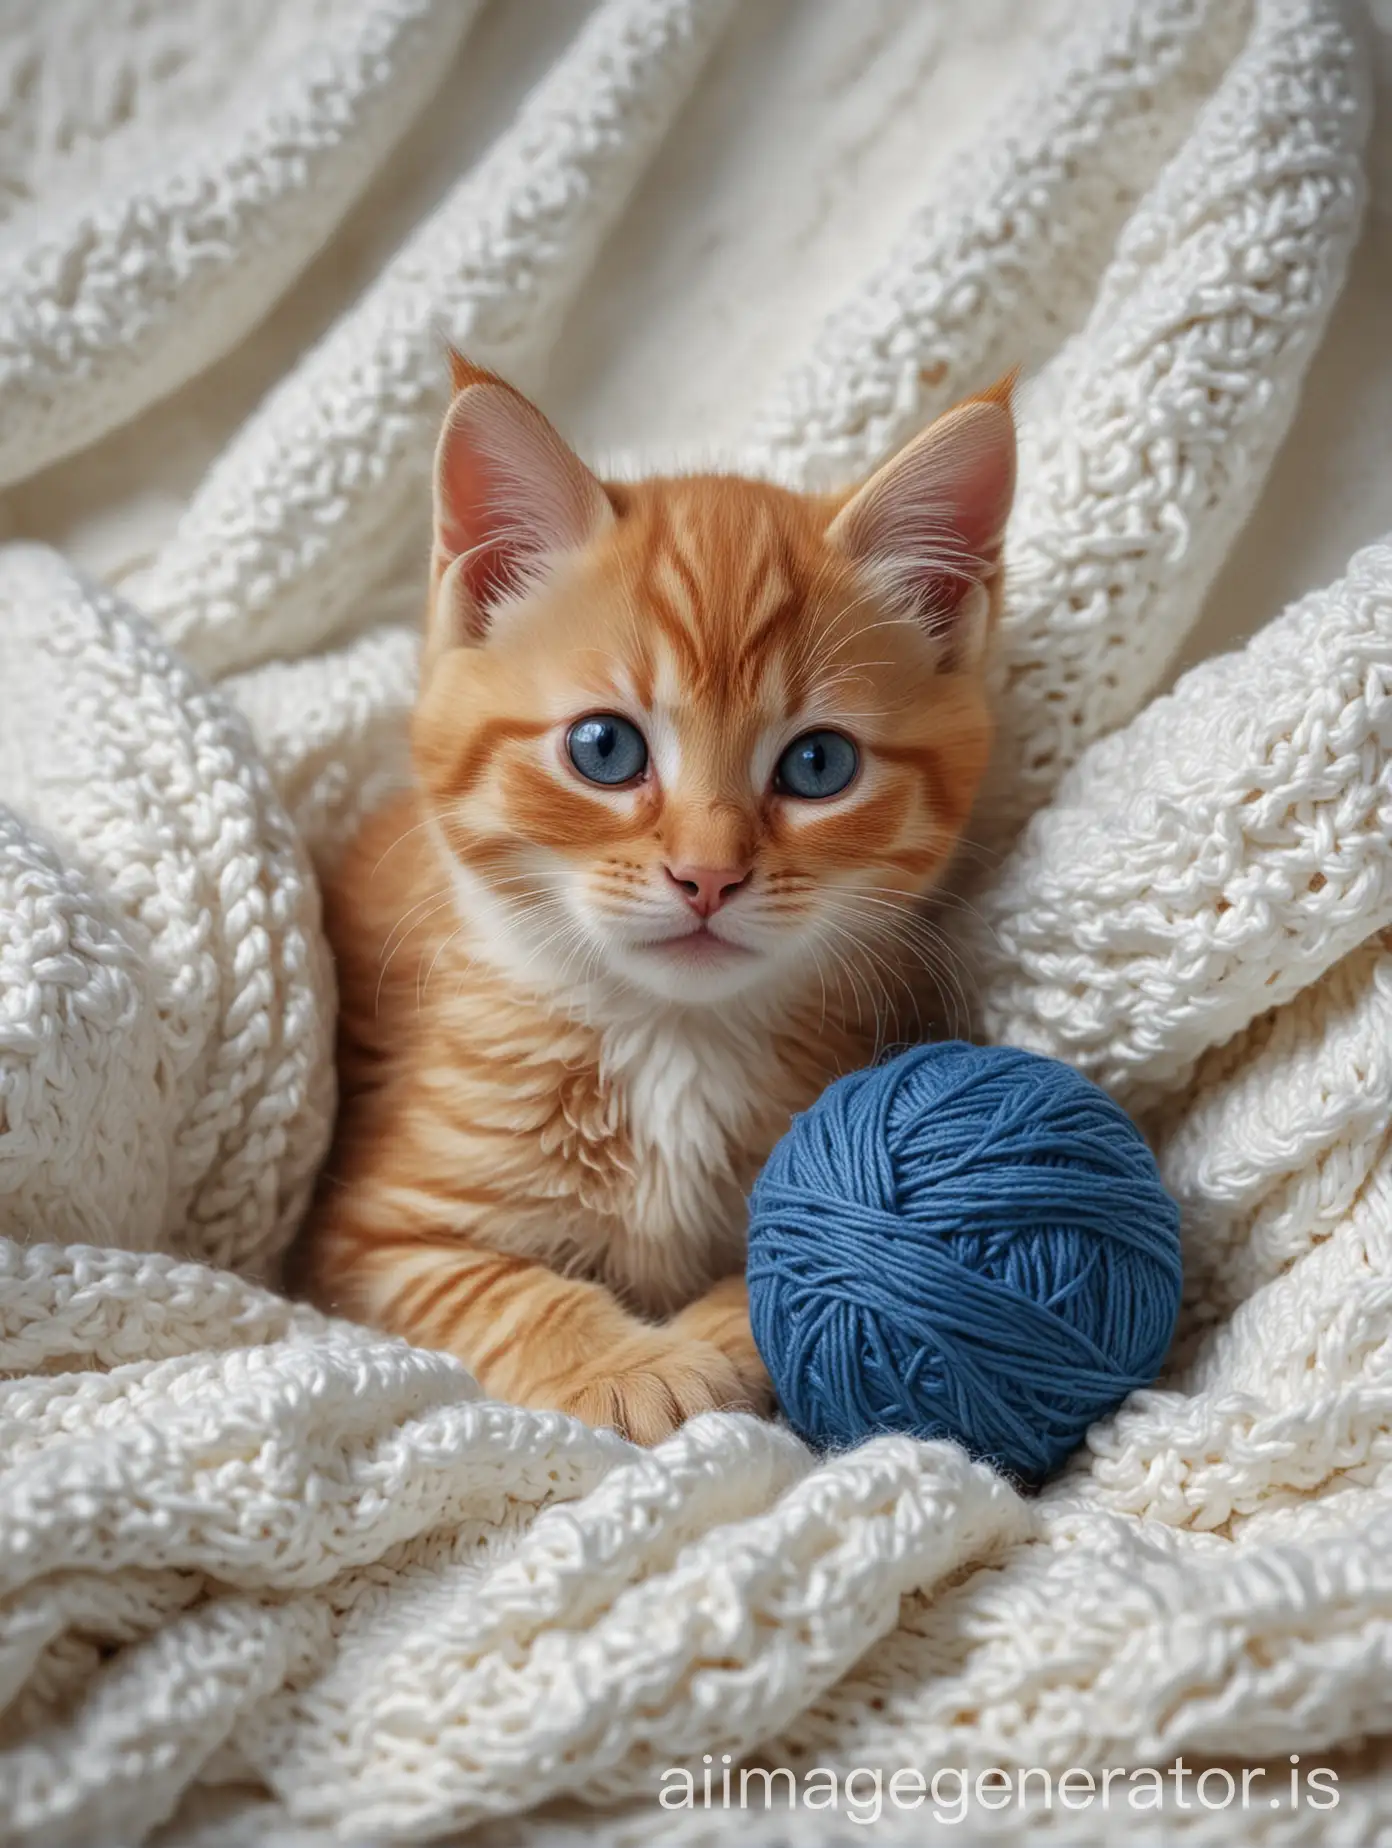 Adorable-Ginger-Kitten-Cuddled-on-Soft-White-Knit-Blanket-with-Blue-Yarn-Ball